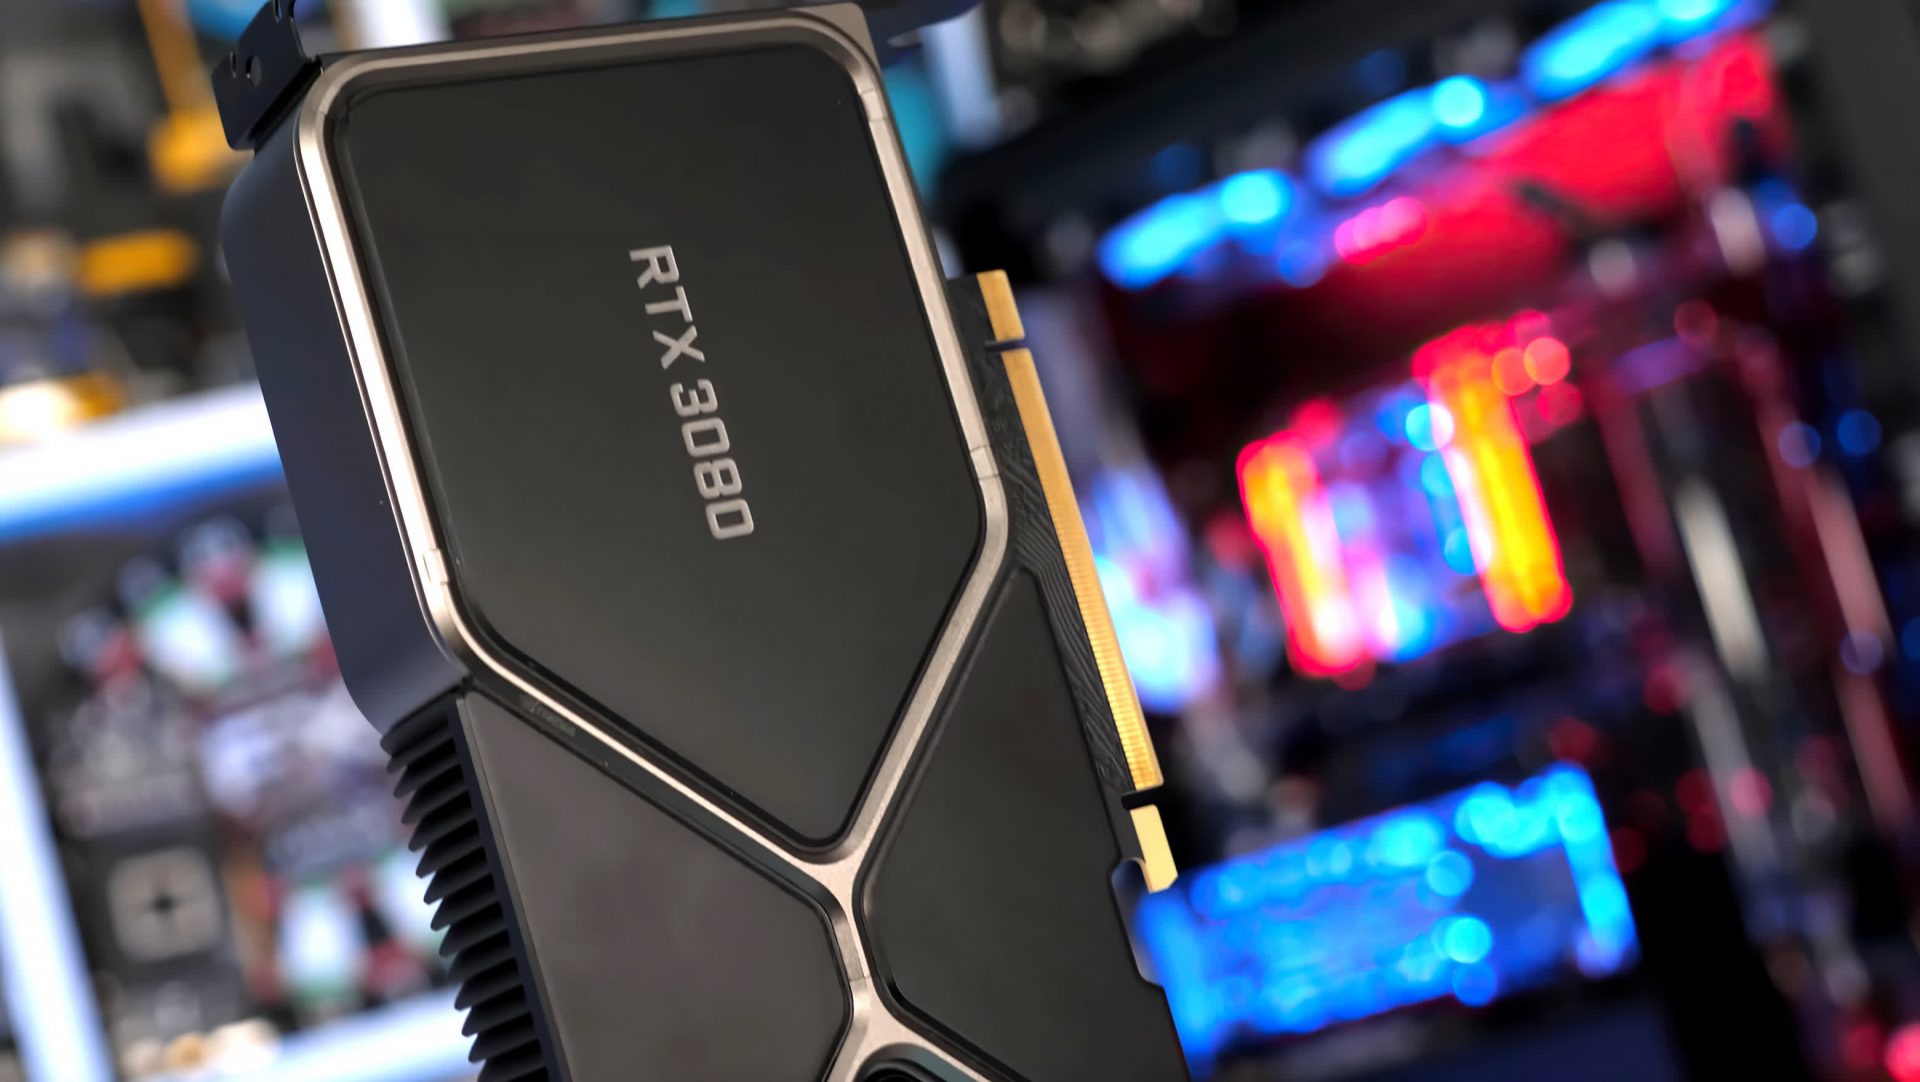 Scalpers are promoting RTX 3080 cards on eBay for hundreds of bucks, Nvidia taking action